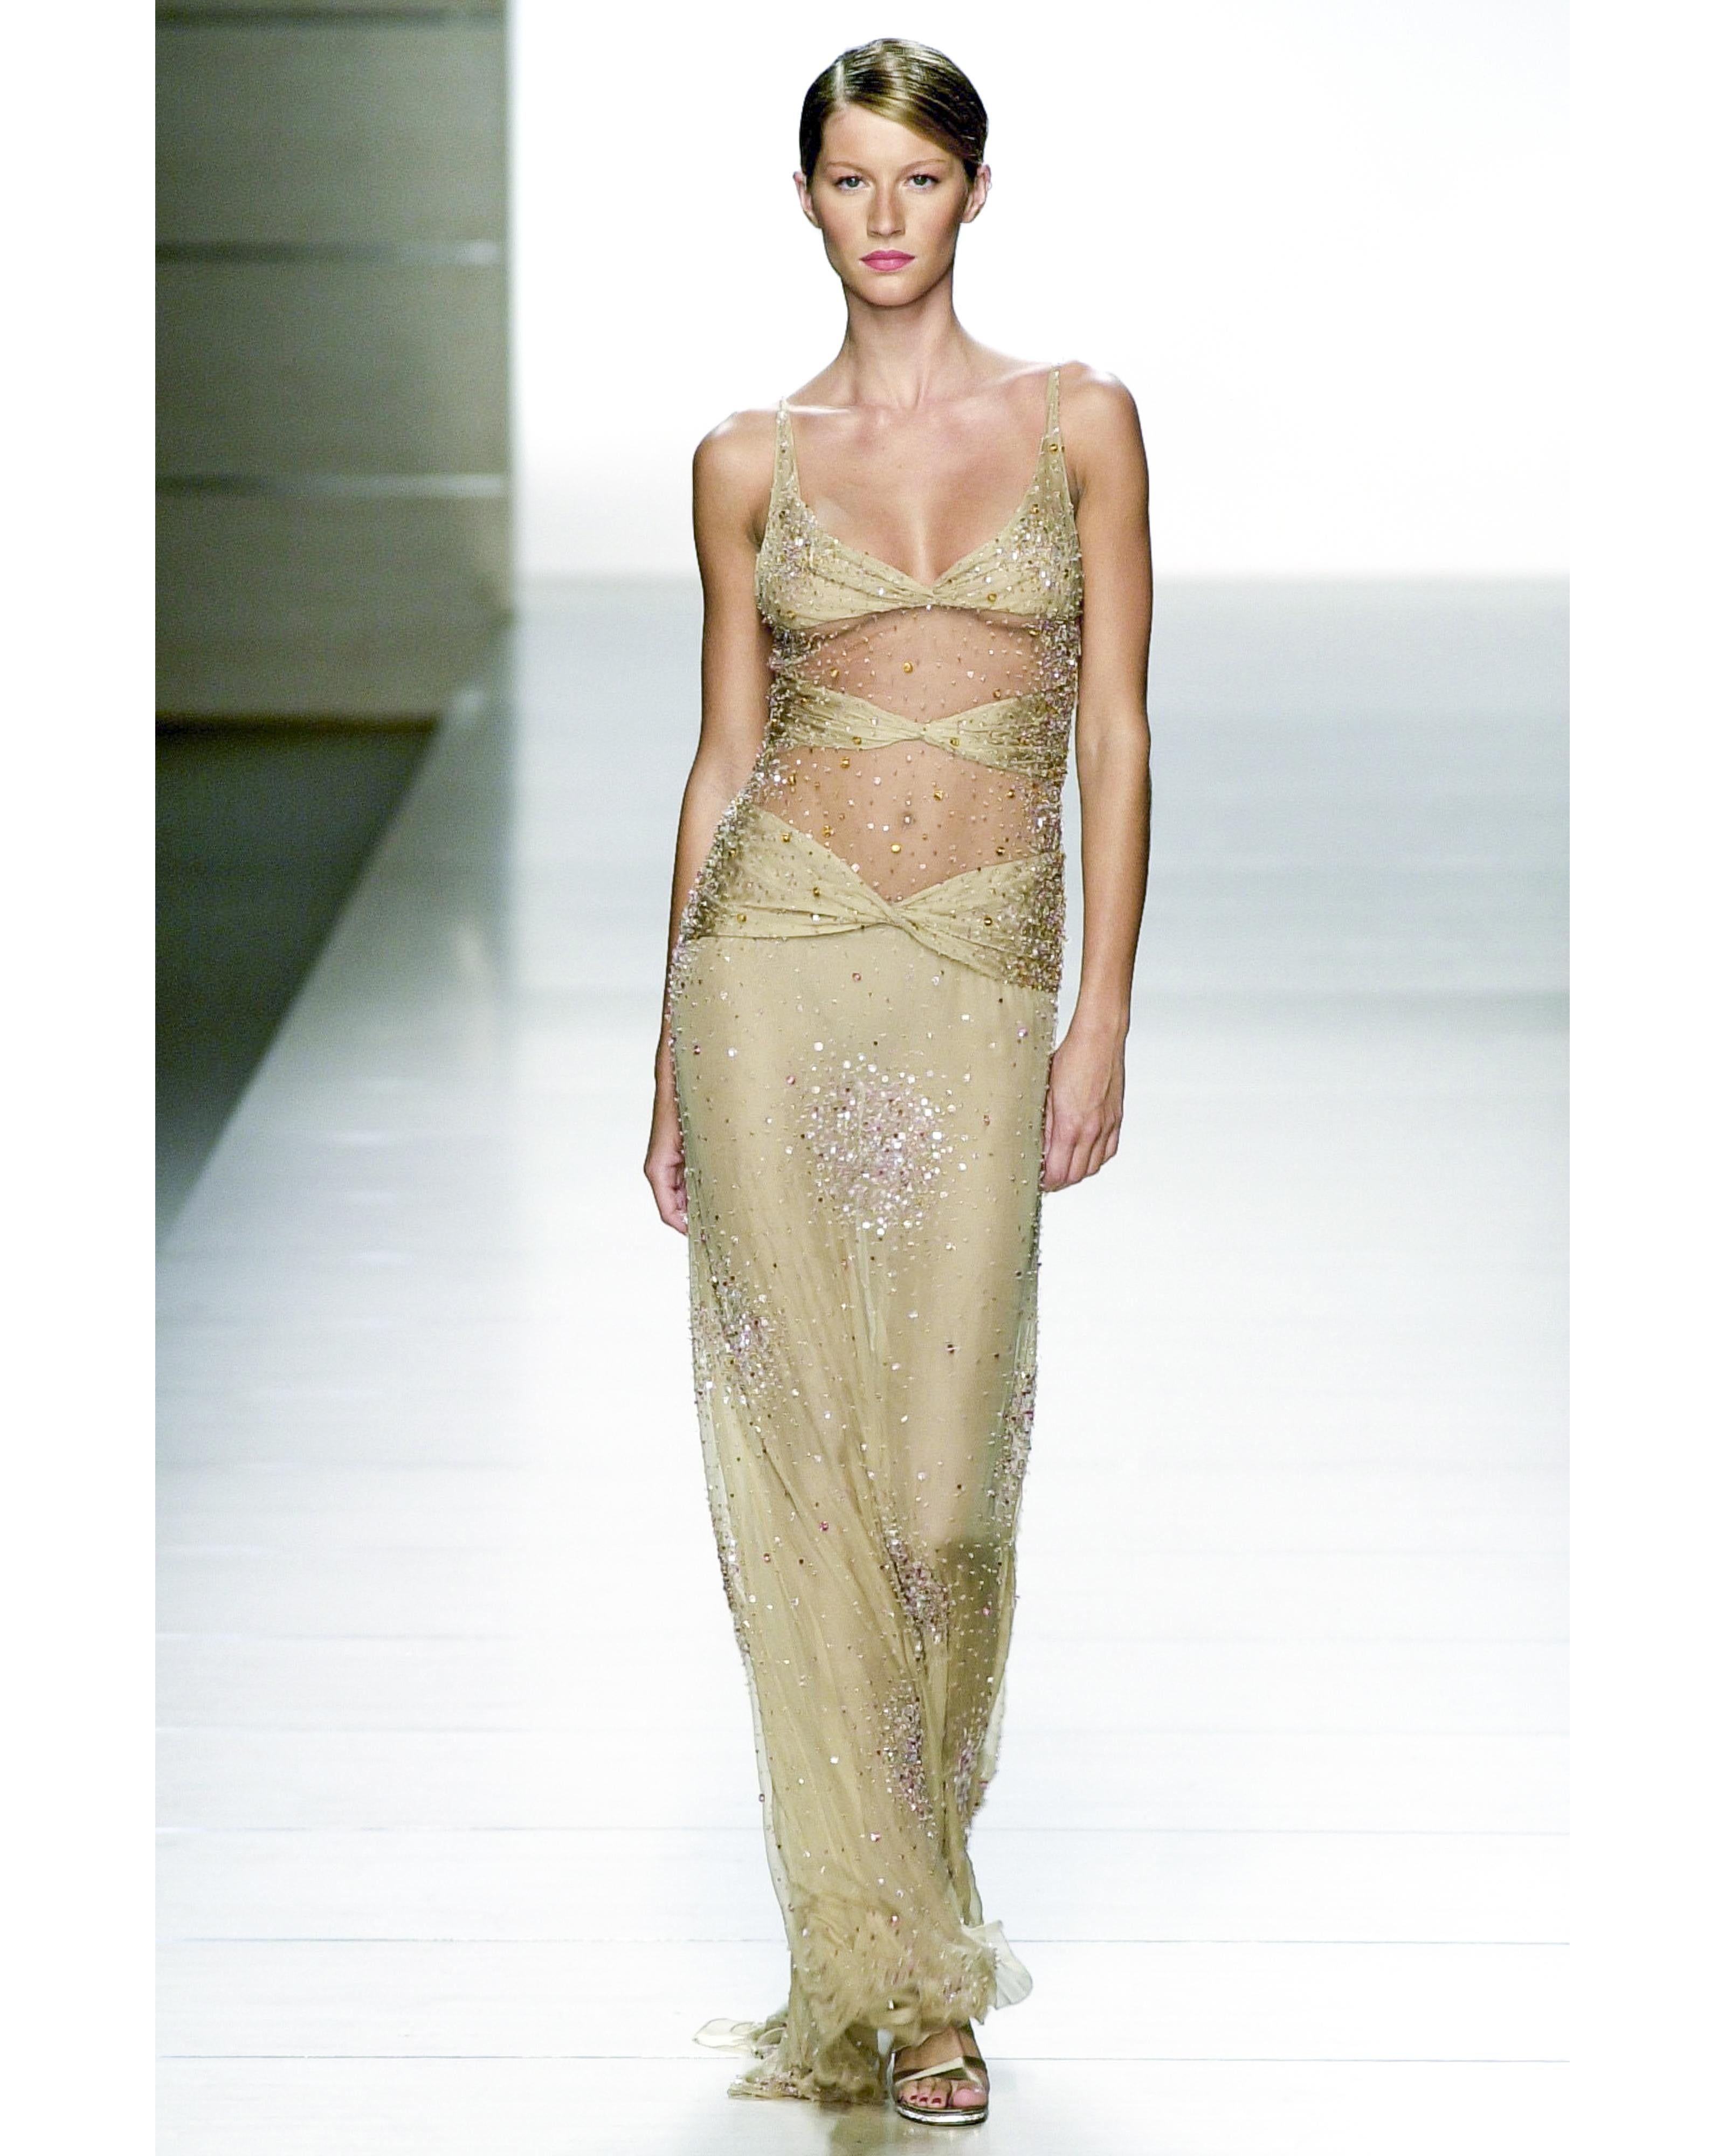 S/S 2001 Valentino mesh and silk tan embellished gown. Sleeveless spaghetti strap slip gown with mesh paneling at upper, with full embellishments throughout. Upper bustier portion has relatively small cups in order to reveal slight under-boob.